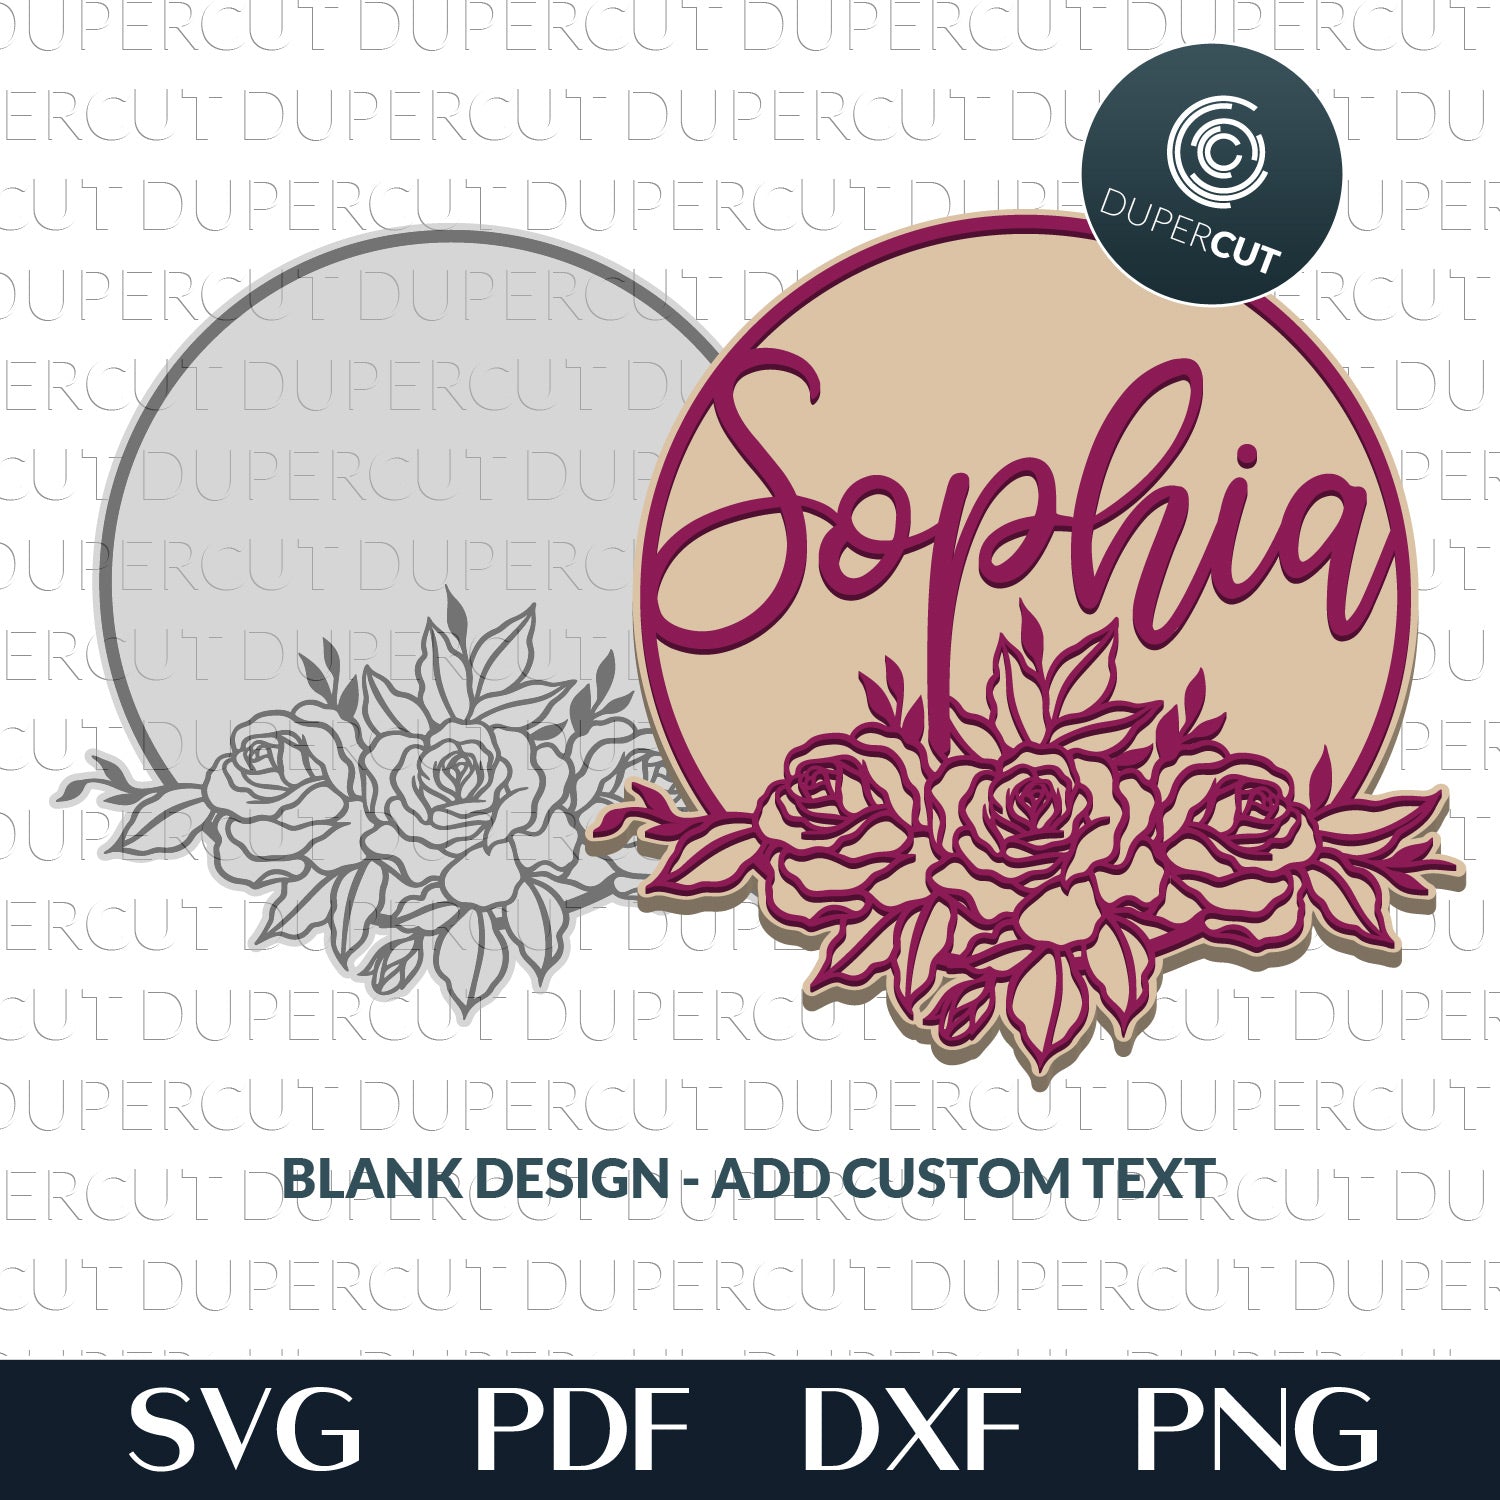 Floral girls room door hanger add custom name - SVG DXF vector files pattern for Glowforge, Cricut, Silhouette, CNC plasma machines by DuperCut.com